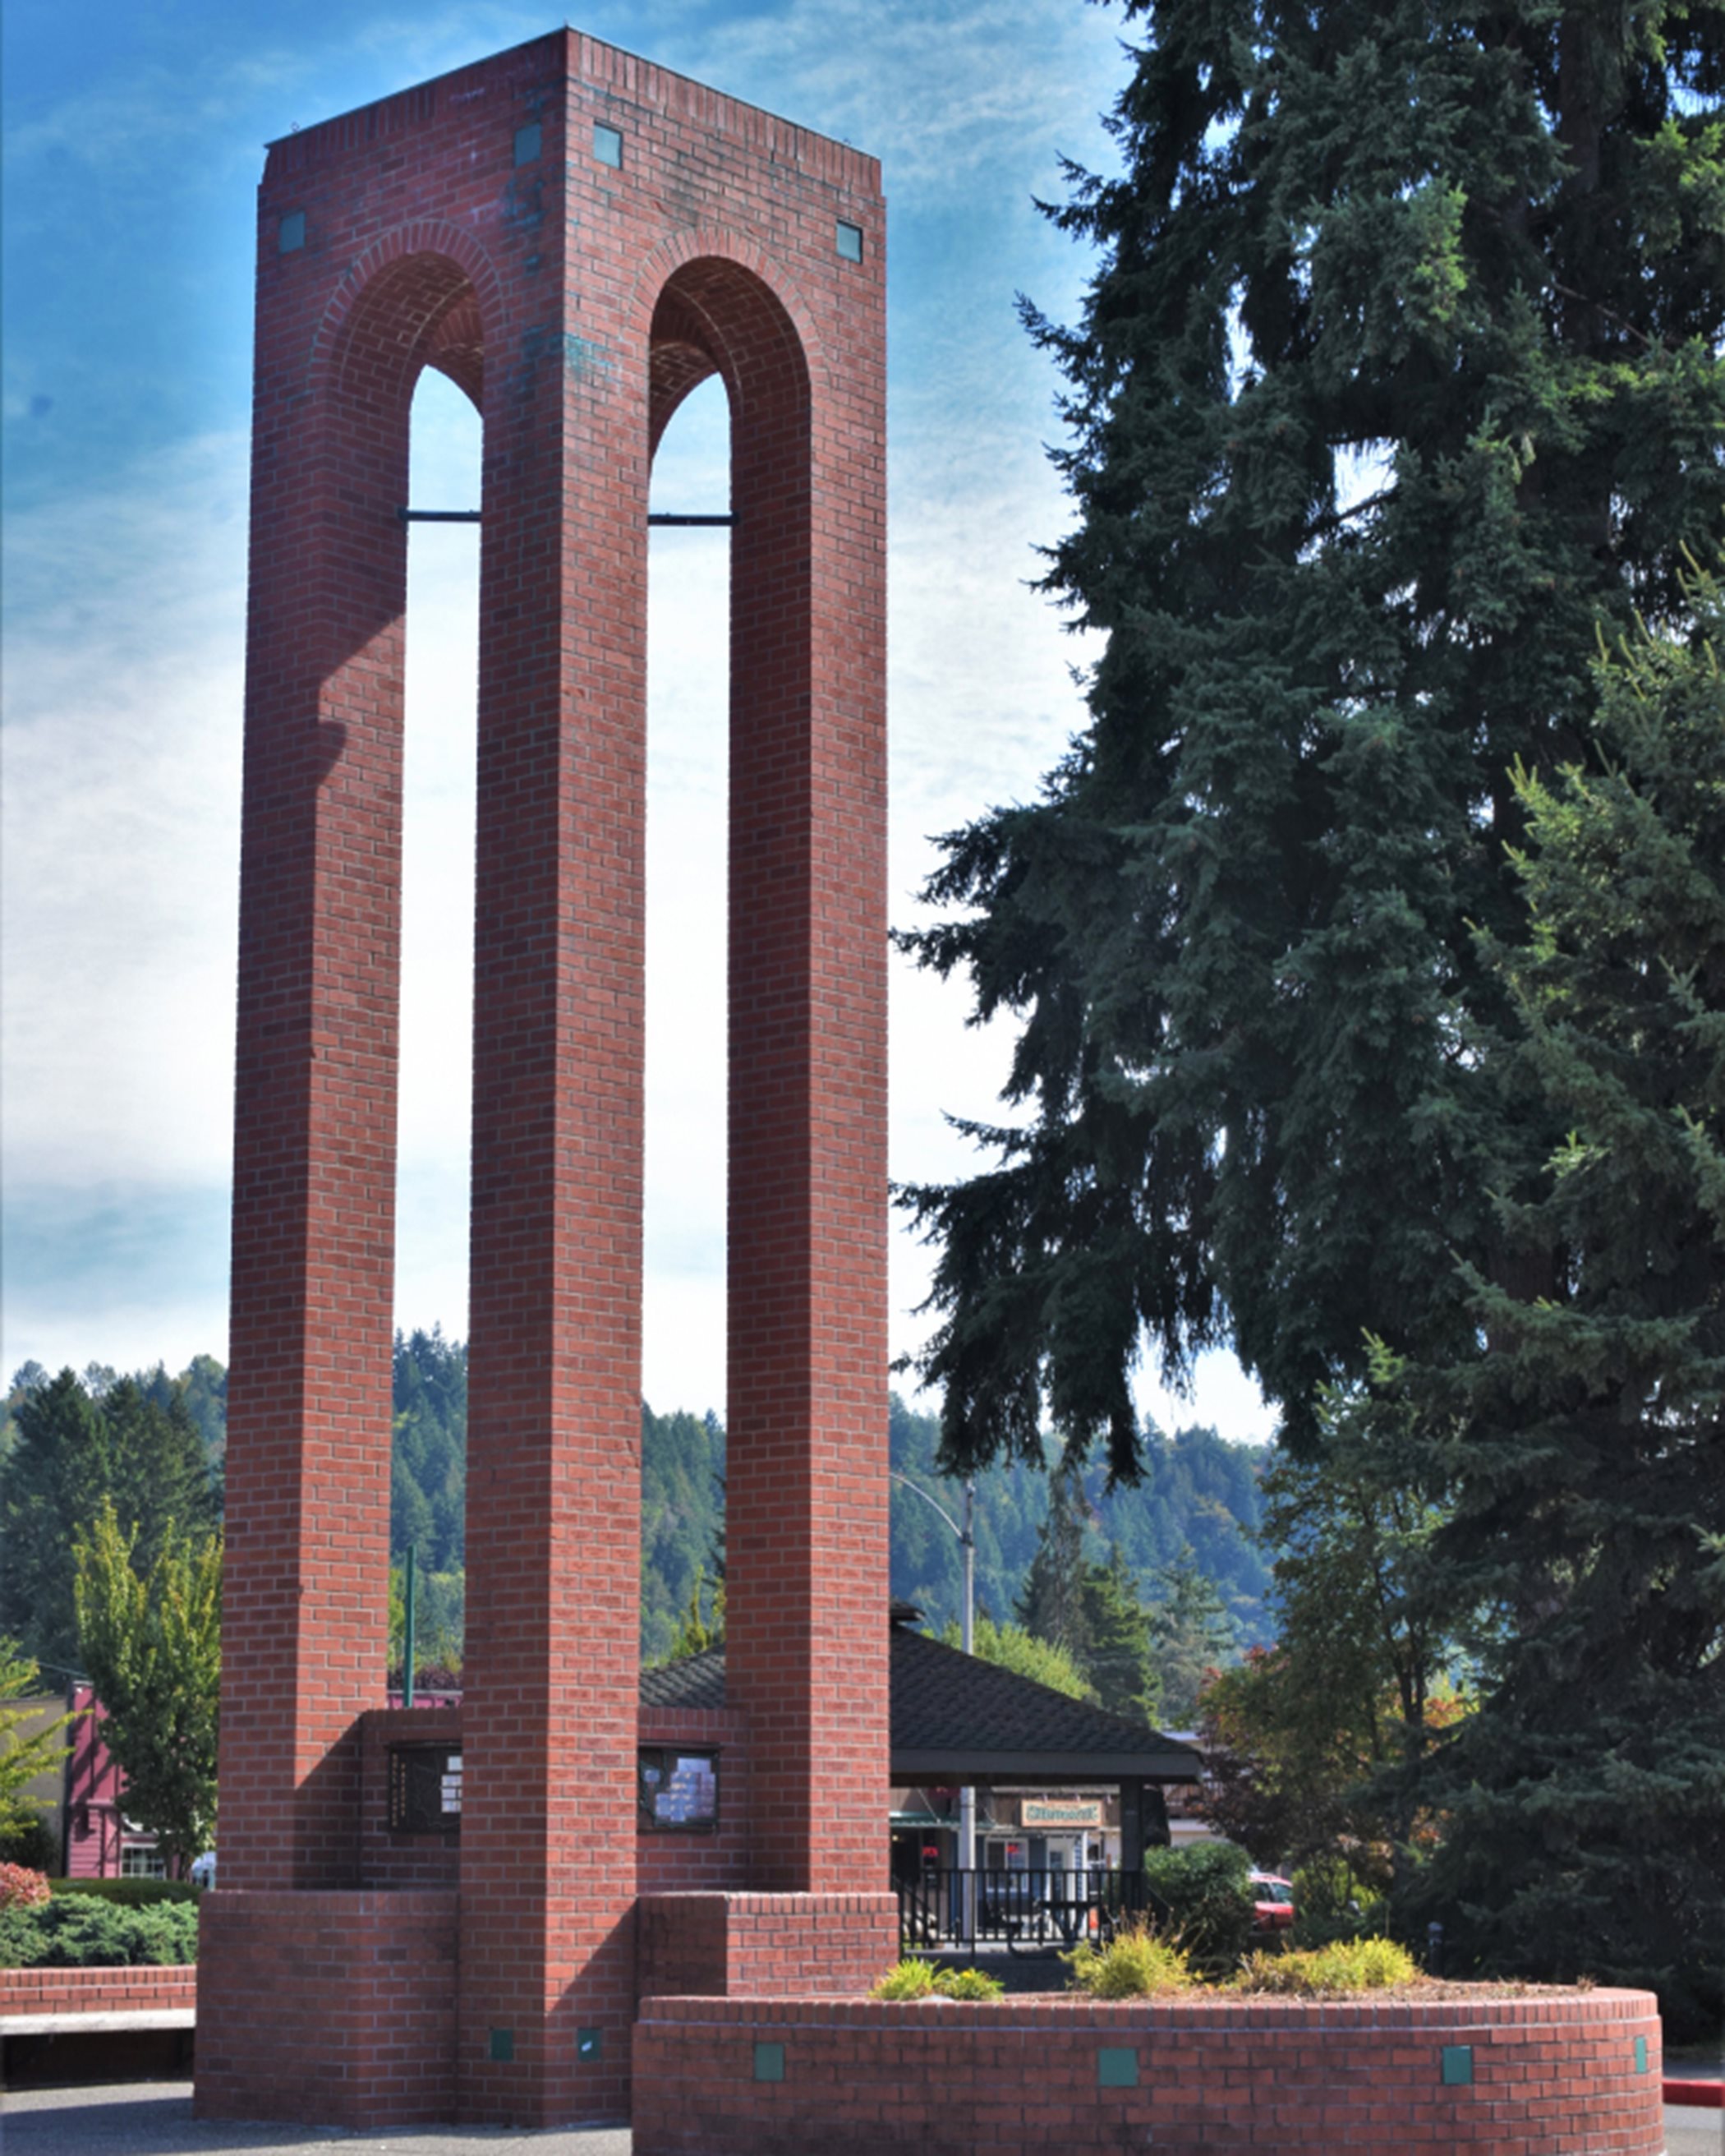 A Park in Orting